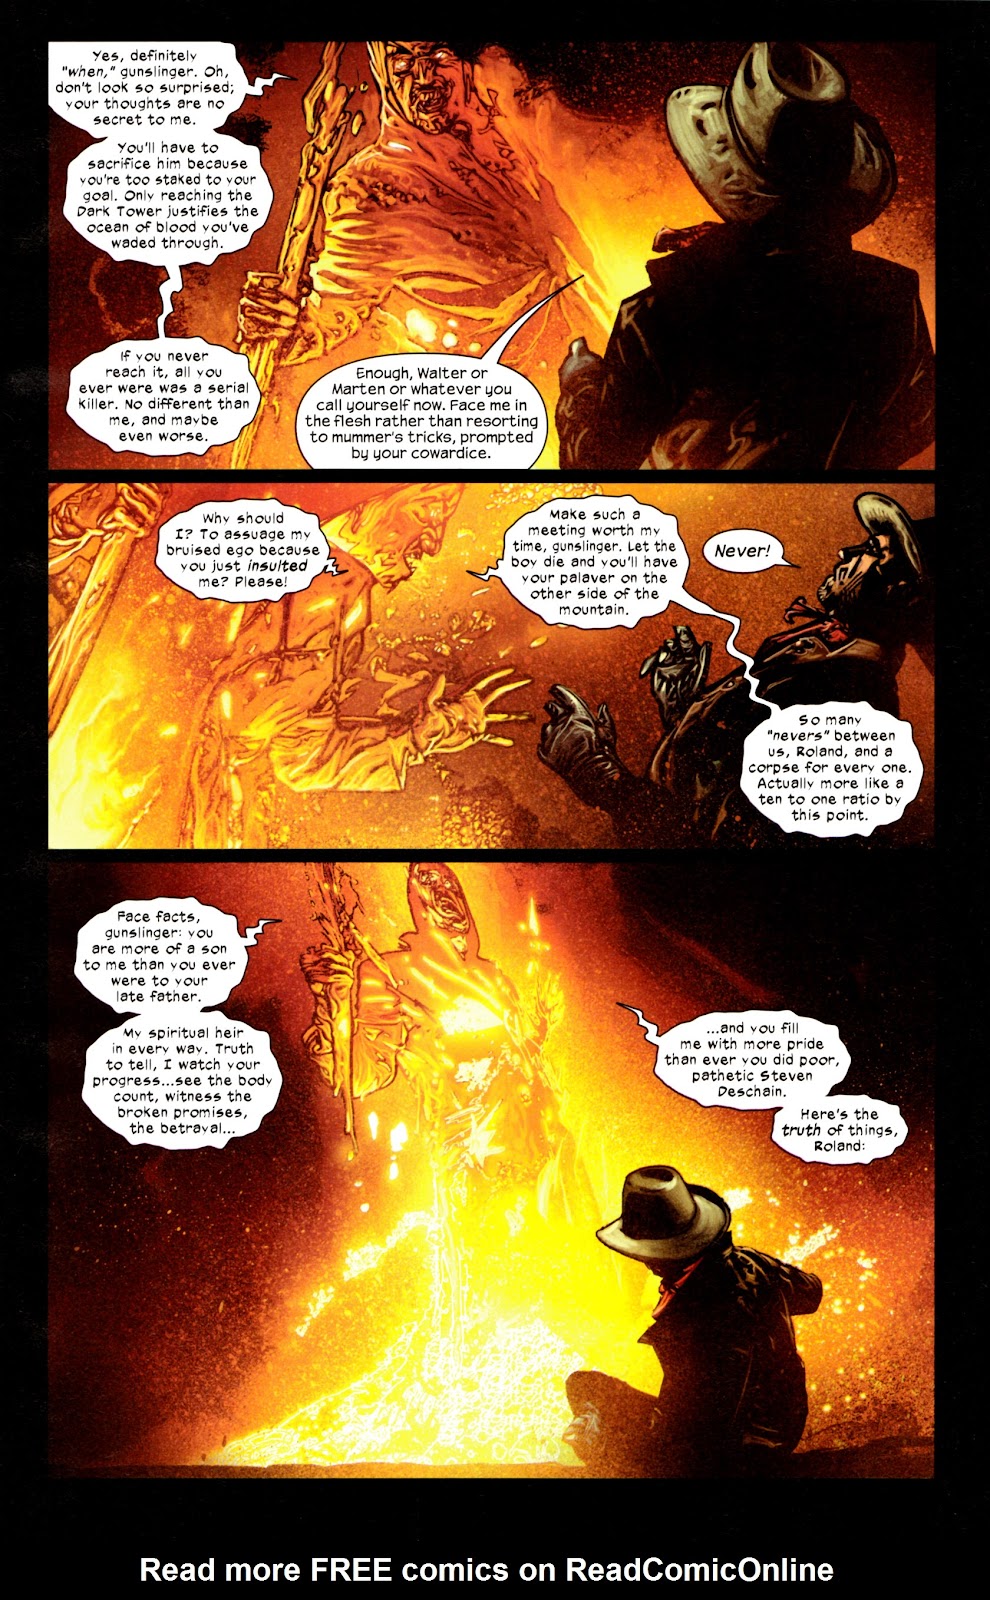 Dark Tower: The Gunslinger - The Man in Black issue 1 - Page 7